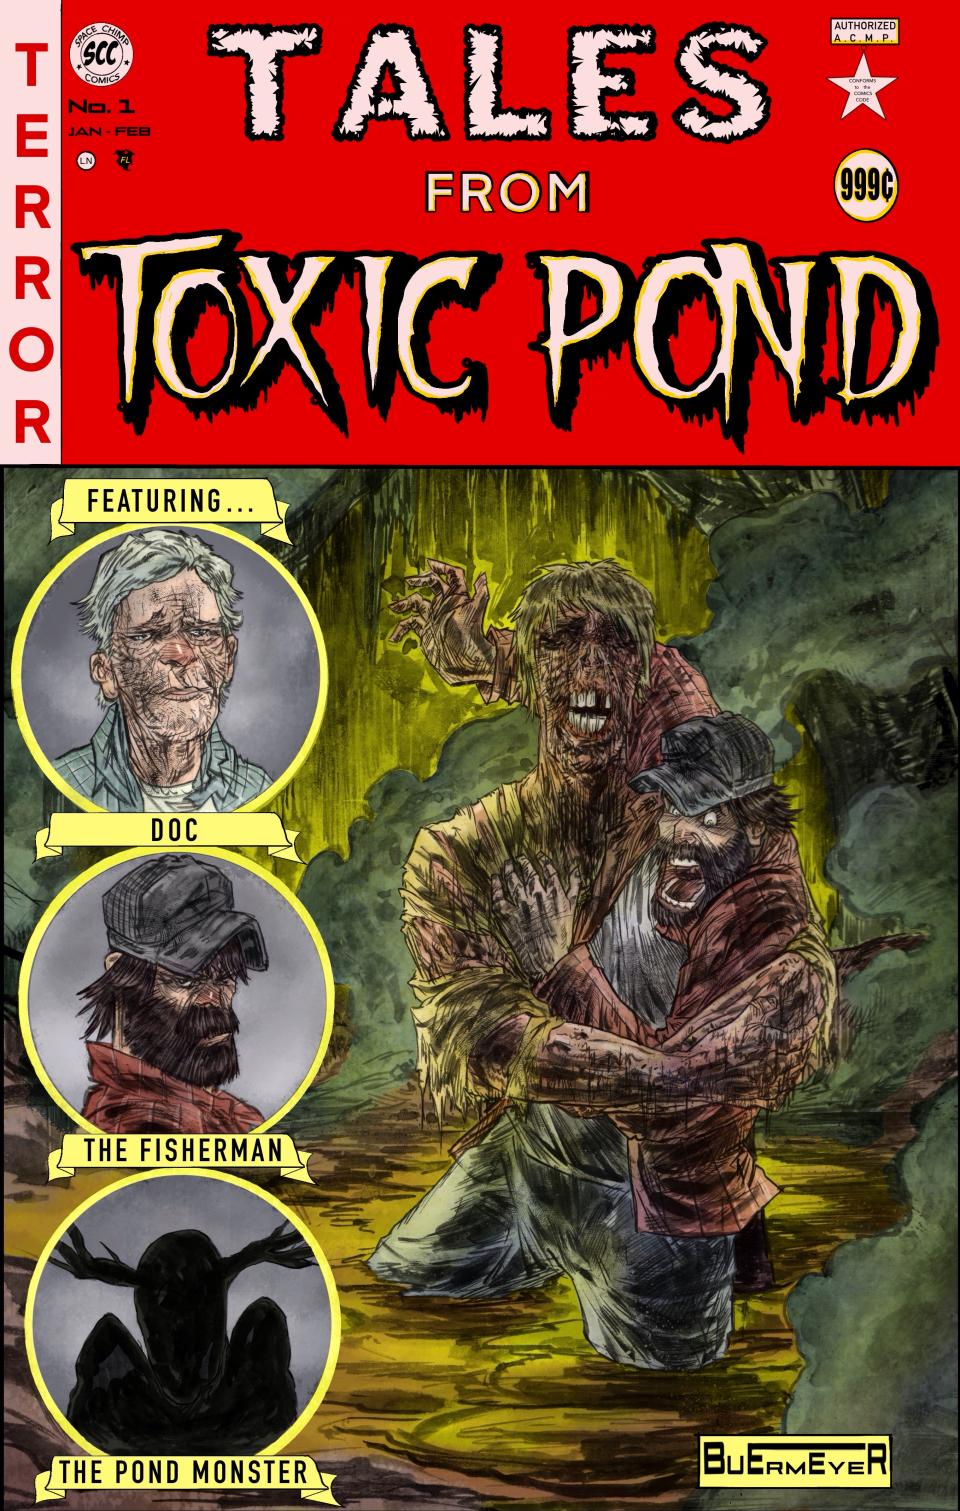 The first issue of Tales from Toxic Pond featured a "Twilight Zone" homage cover and an EC Comics "Tales from the Crypt "homage cover.